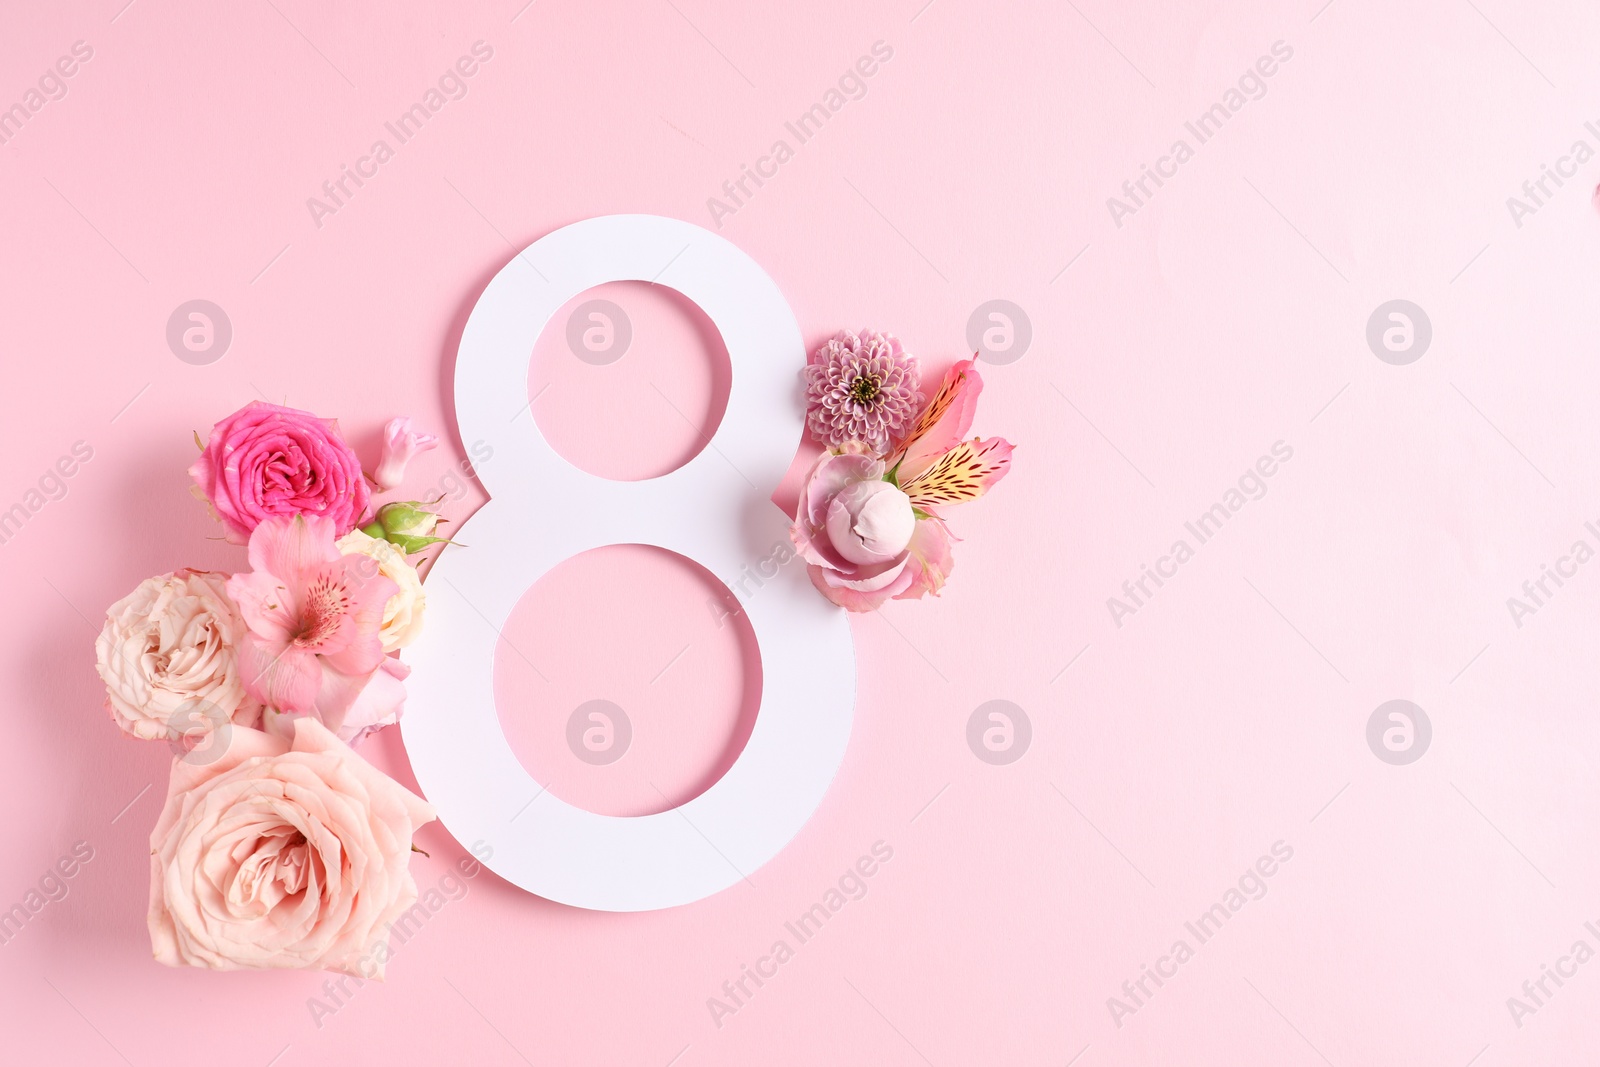 Photo of 8 March greeting card design with beautiful flowers on light pink background, top view